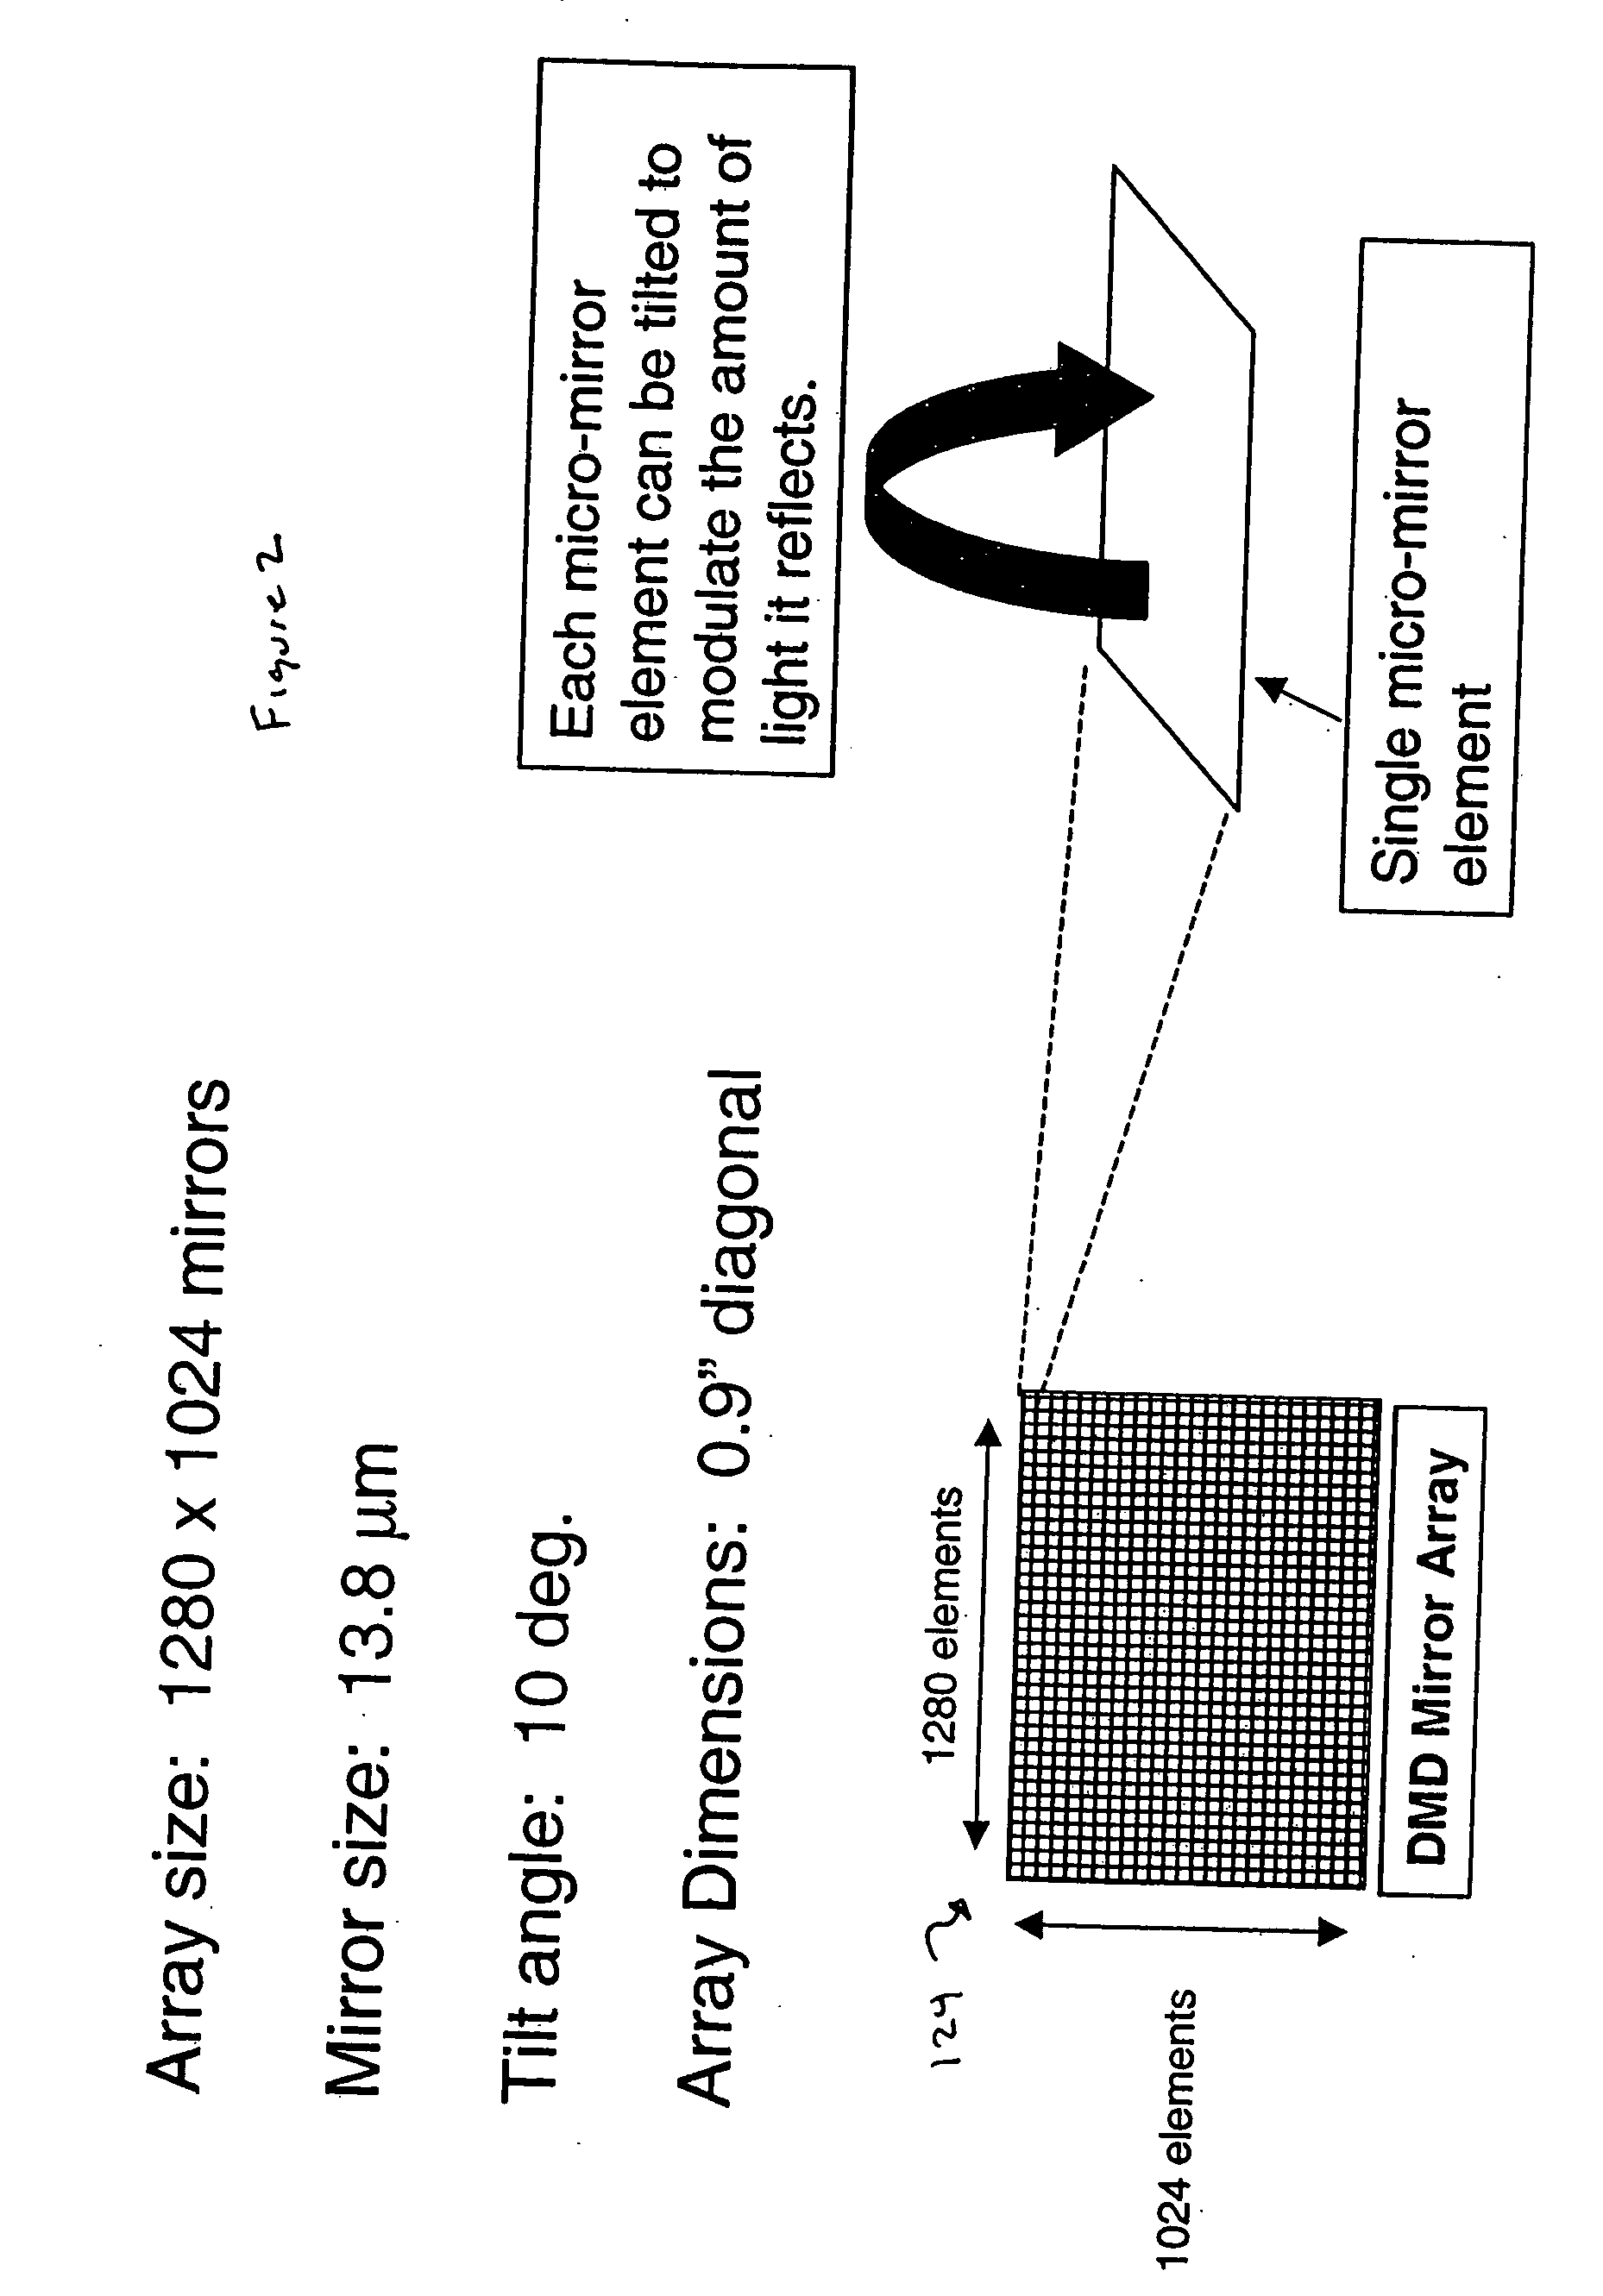 Dynamic illumination uniformity and shape control for lithography